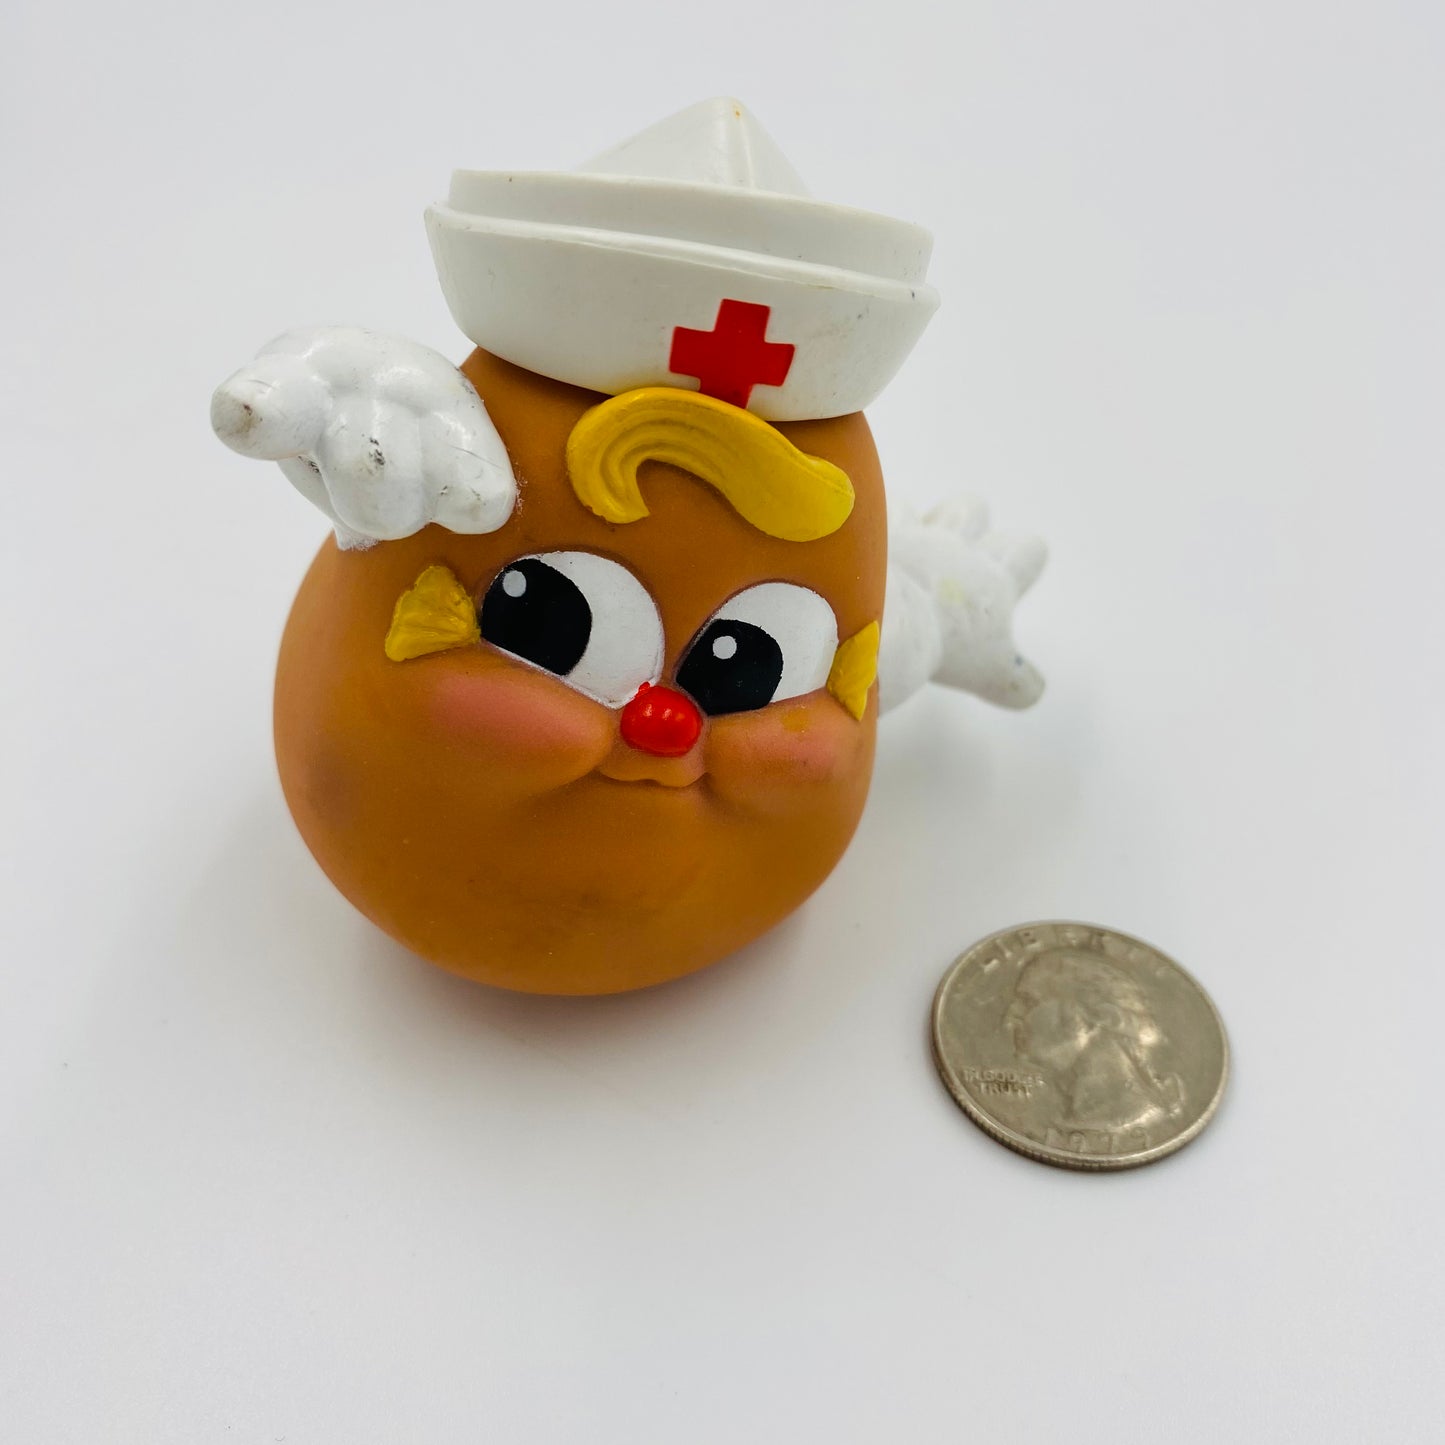 Playskool Potato Head Kids Nurse Sophie with hat only Wendy's Kids' Meal toy (1988) loose